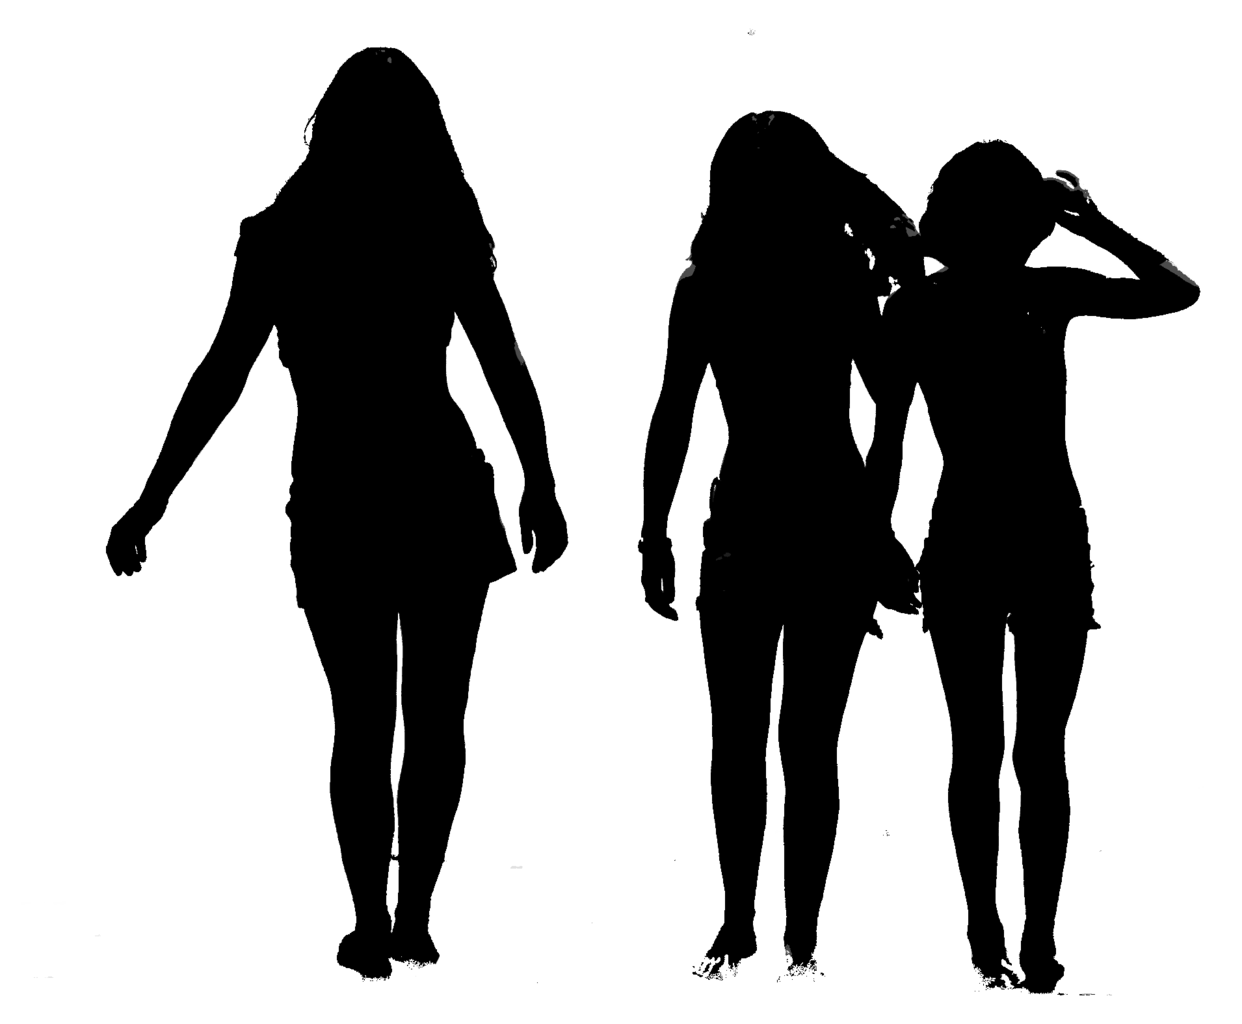 File:Silhouette of Trio.png - Wikimedia Commons